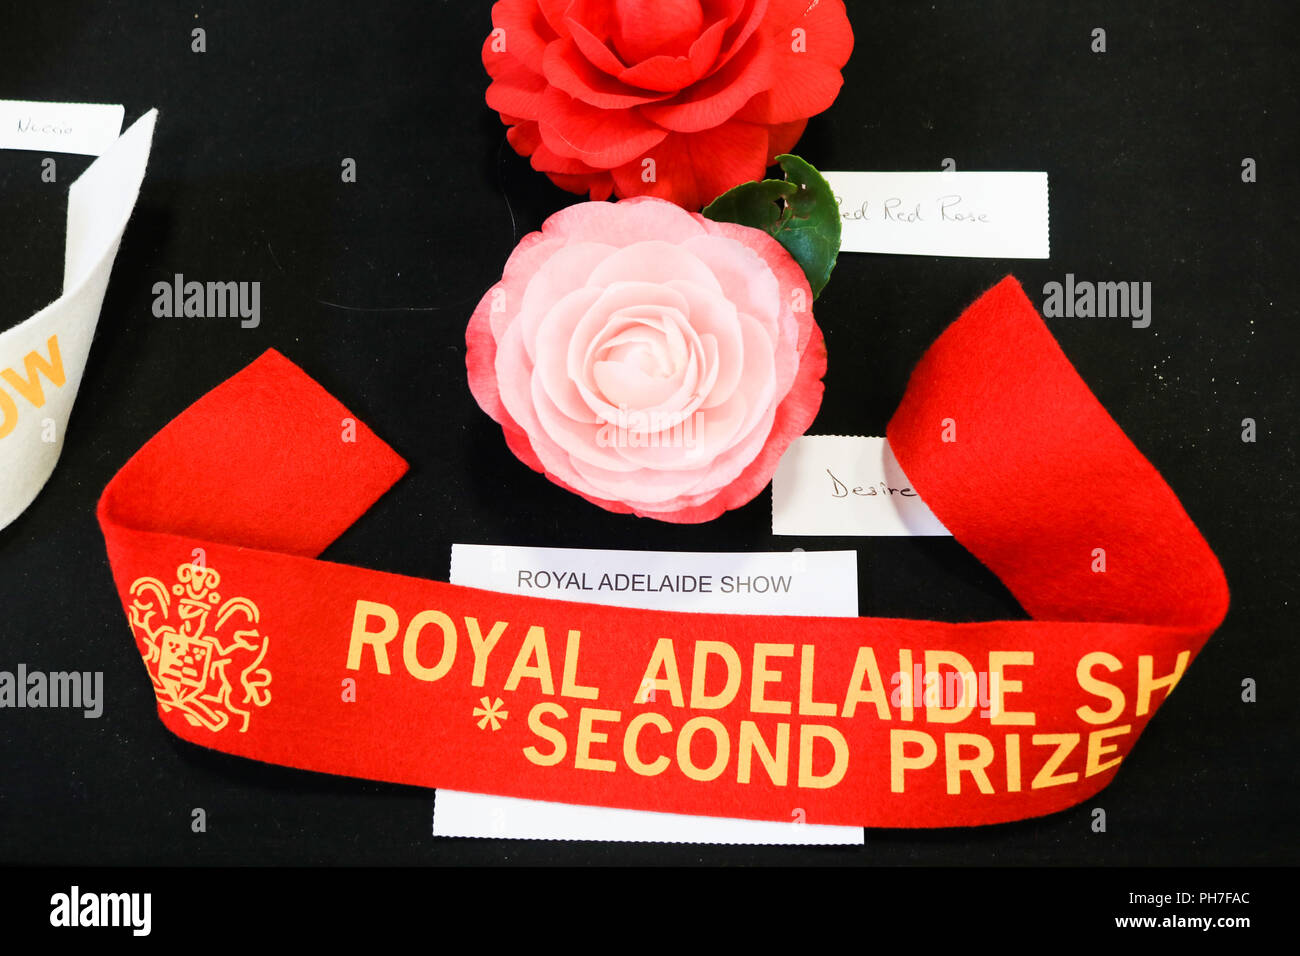 Adelaide Australia.31 August 2018.  The Royal Adelaide Show an annual agricultural event run by the Royal Agricultural and Horticultural Society of South Australia  where 'city meets country' and the rural industries of Australia can be shown and celebrated once a year opens at the Adelaide Showgrounds from 31 August-9 September showcasing, local produce, cookery competitions, animals, rides, food and  entertainment and judging livestock Credit: amer ghazzal/Alamy Live News Stock Photo